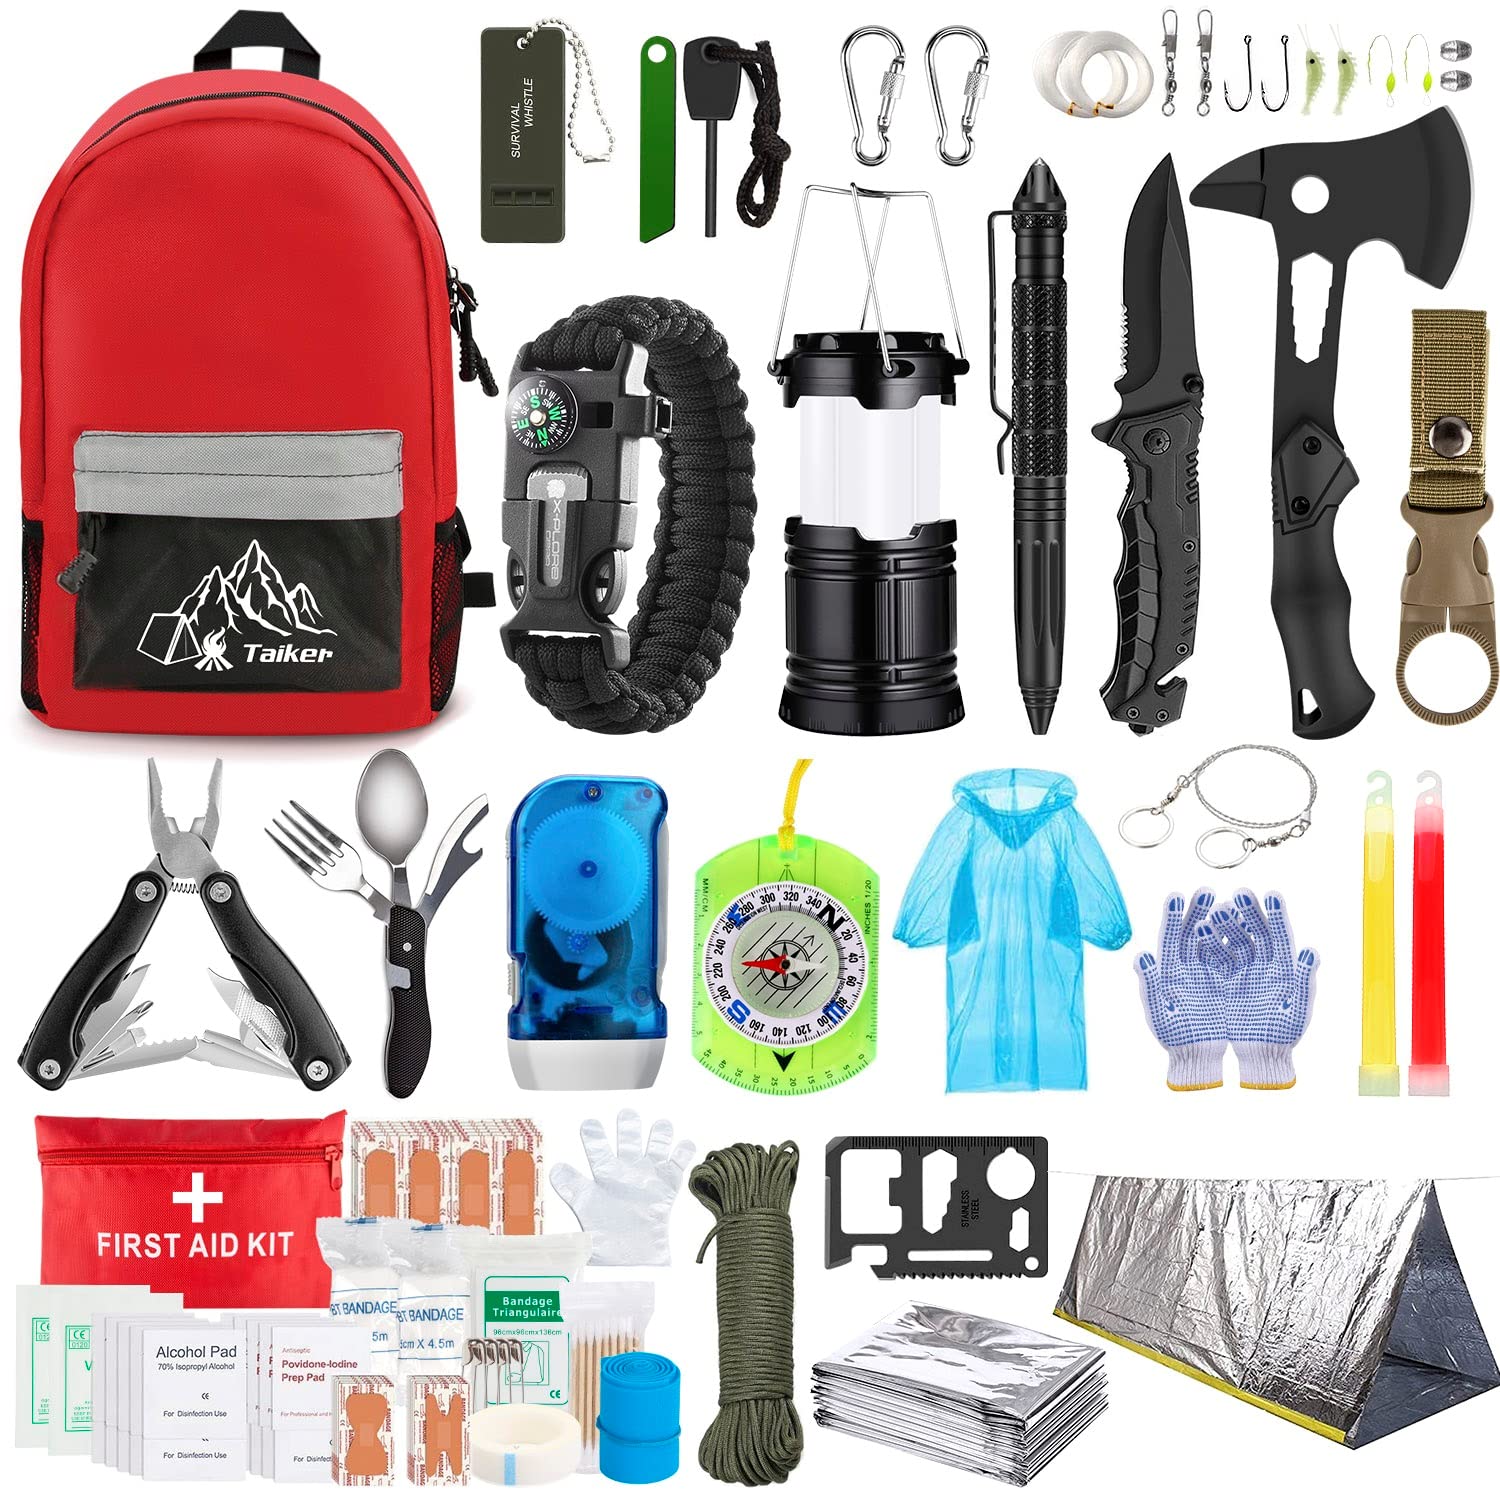 outdoor accessories camping kit emergency survival